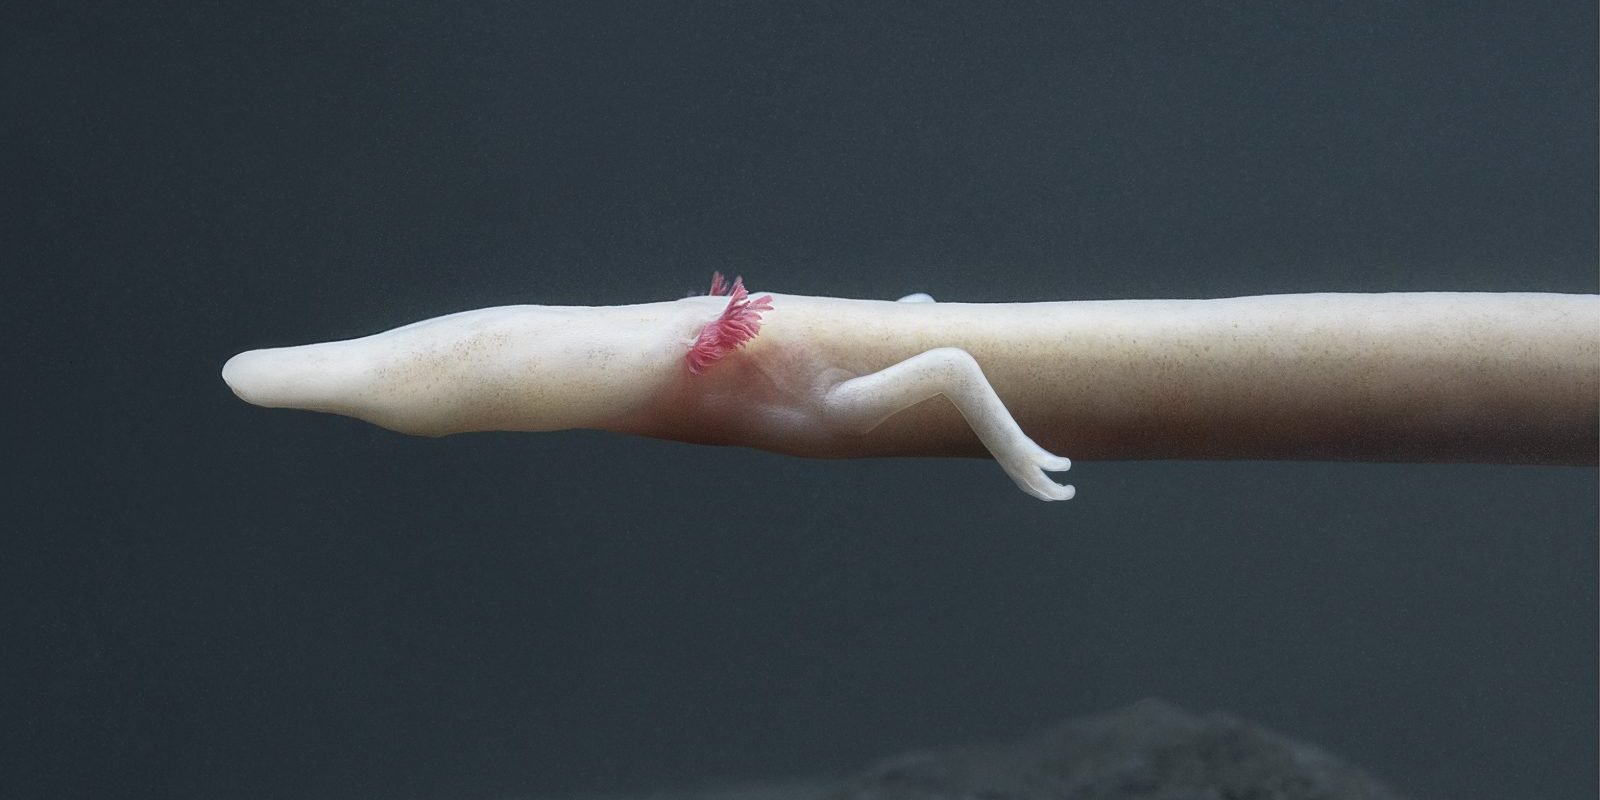 olm salamander e1557382168494.jpg?resize=412,232 - 50 Photographies Of Endangered Species That Will Blow Your Mind By Tim Flach